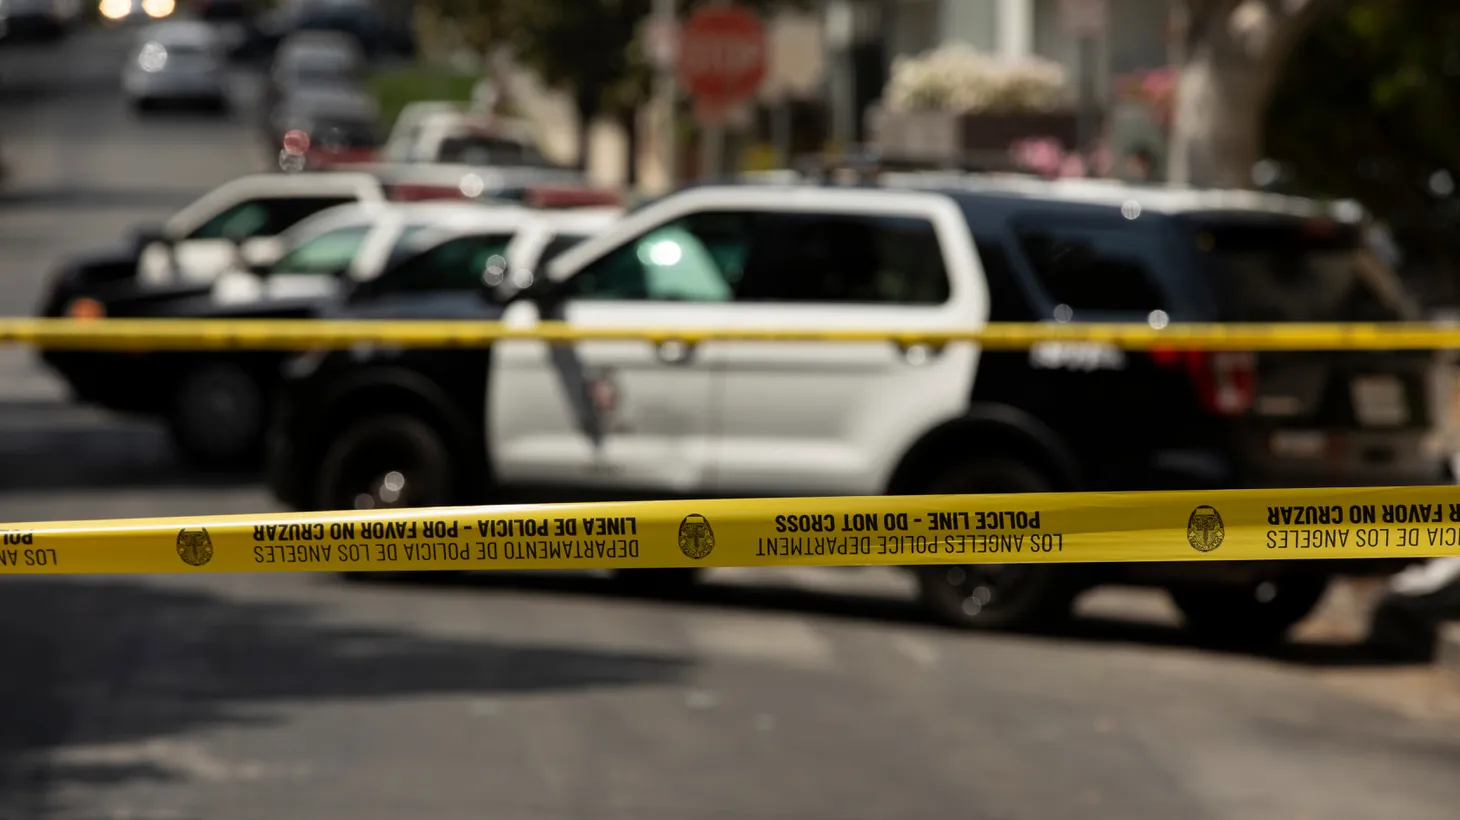 “Police describe some of these incidents becoming rather violent, without the suspects giving the victims even time to comply and hand over the property. [They’re] tackling them in the street, pistol whipping,” says Los Angeles Times reporter Kevin Rector on follow-home robberies targeting wealthy Angelenos.